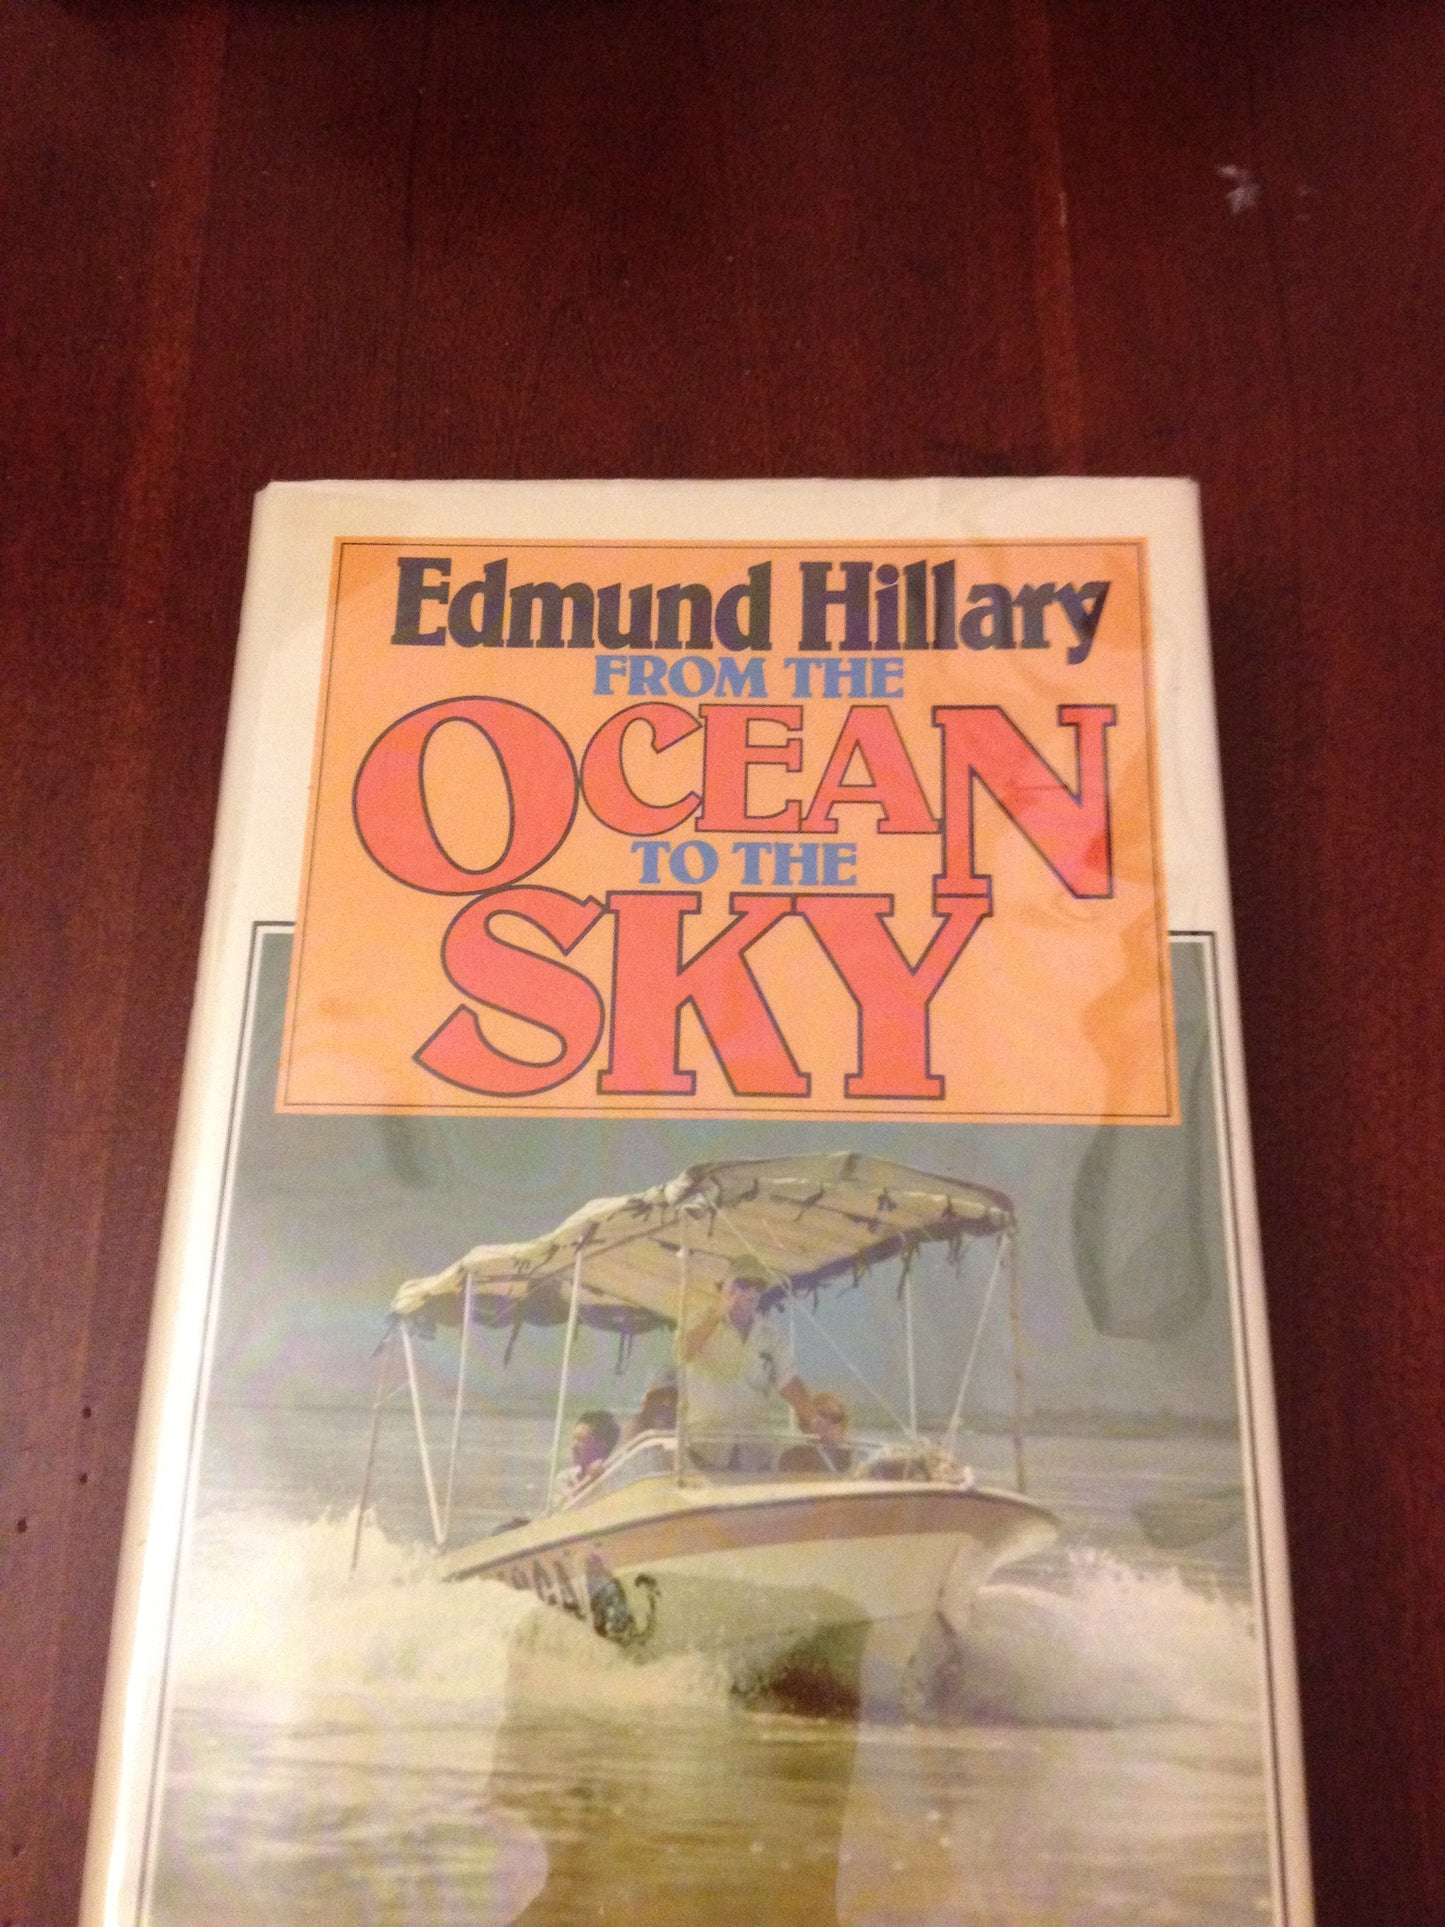 FROM THE OCEAN TO THE SKY - EDMUND HILLARY